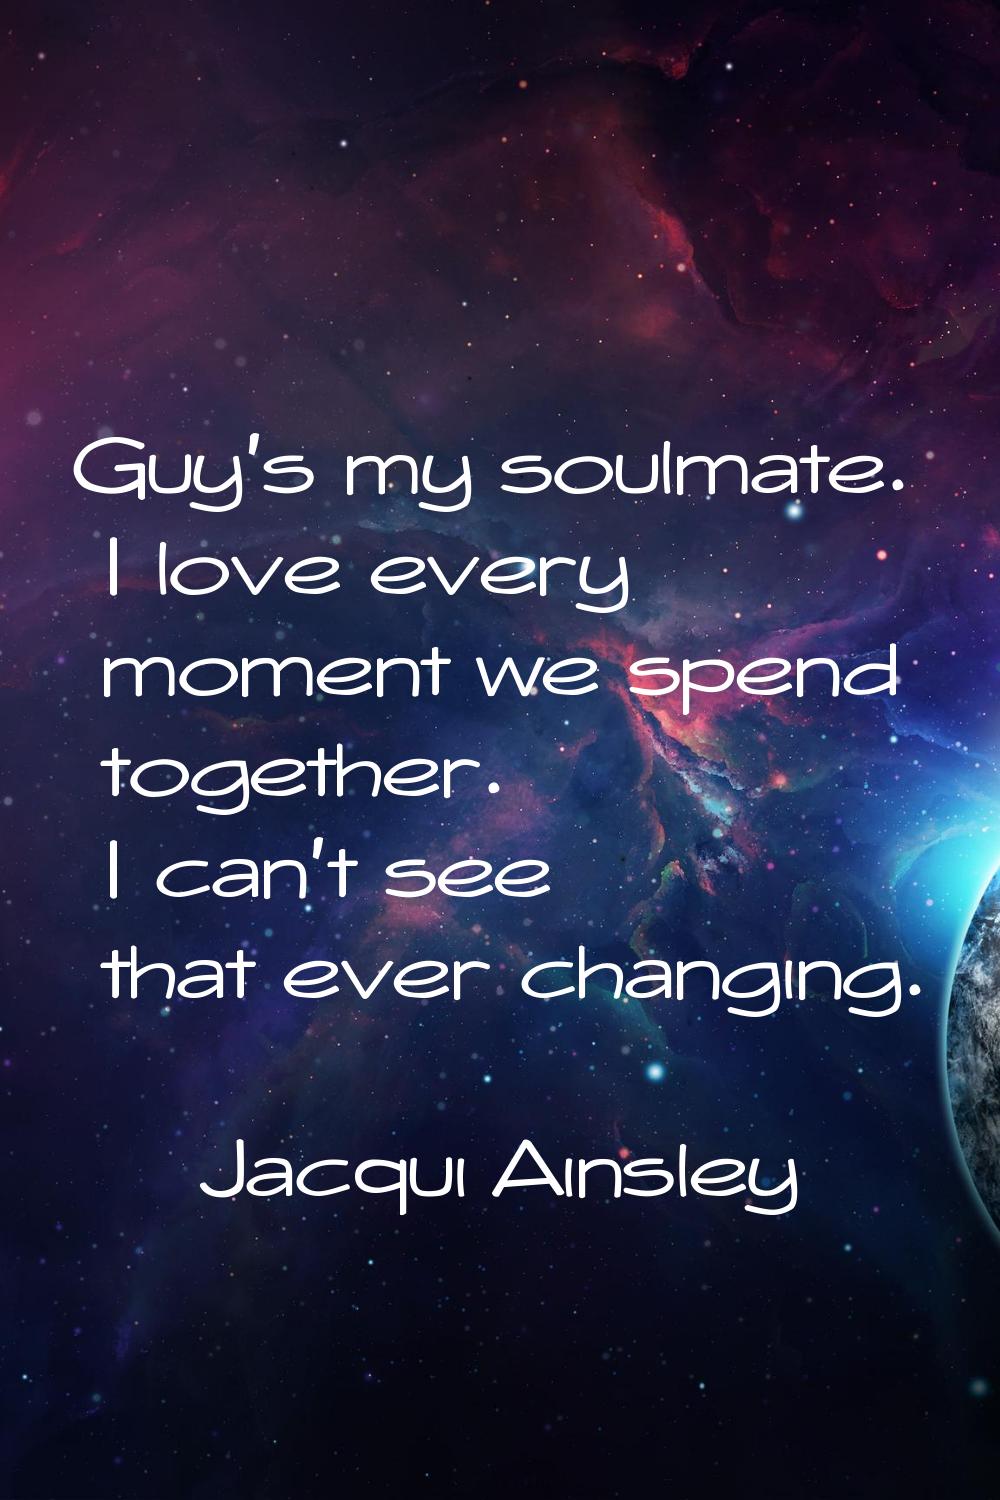 Guy's my soulmate. I love every moment we spend together. I can't see that ever changing.